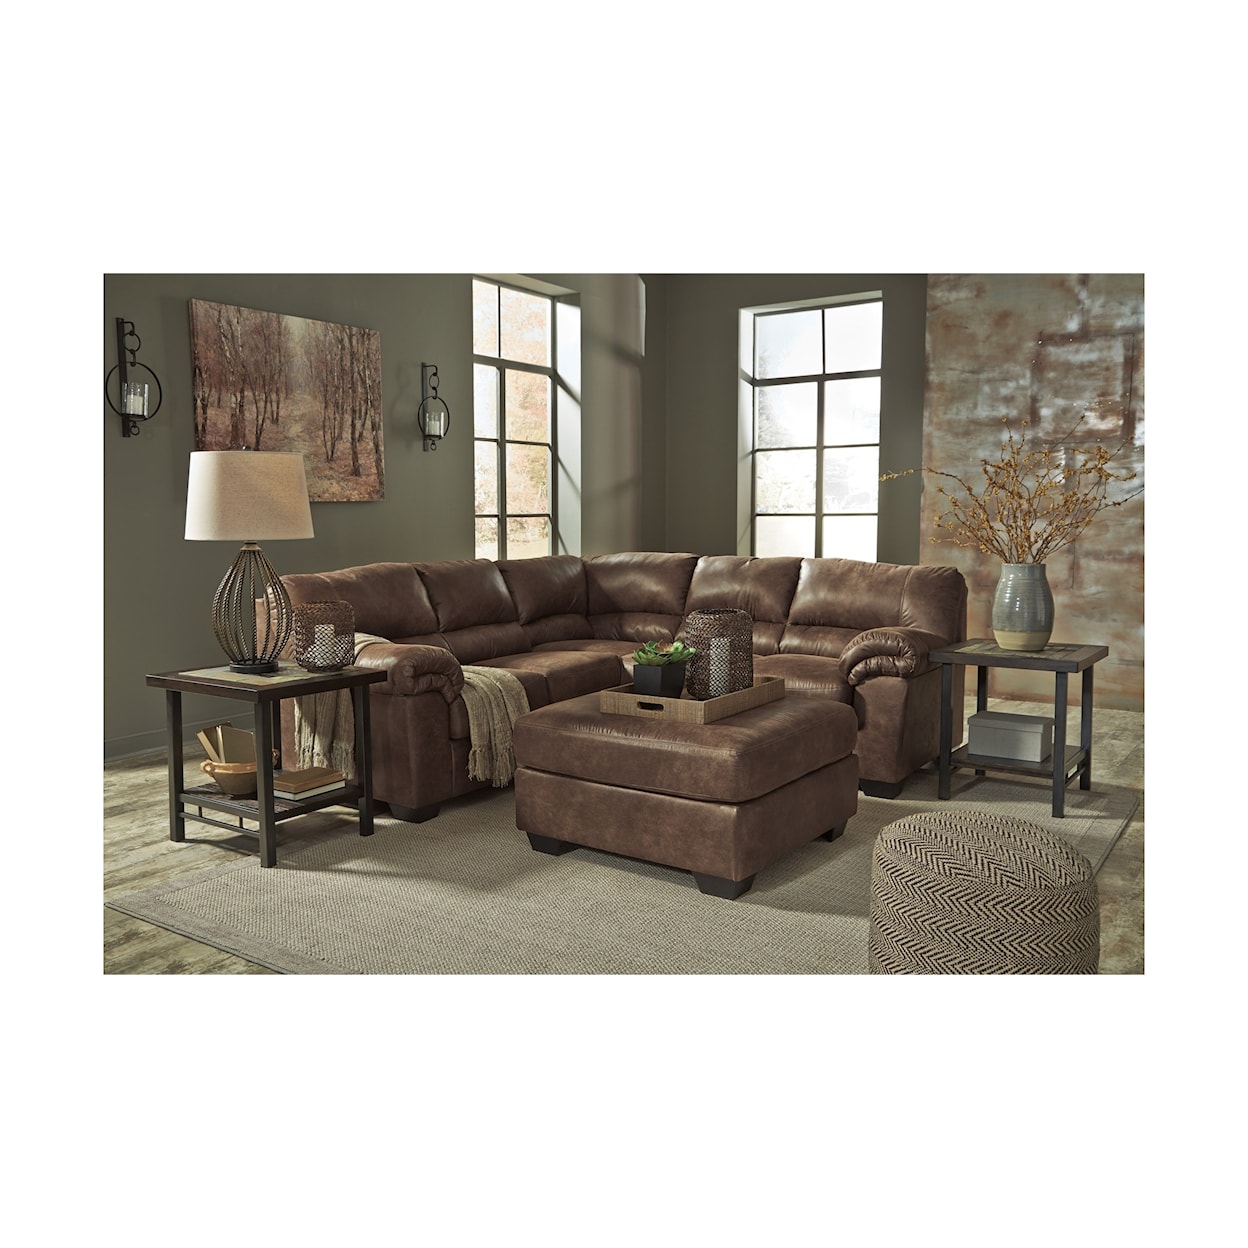 Signature Design by Ashley Bladen 2-Piece Sectional with Ottoman